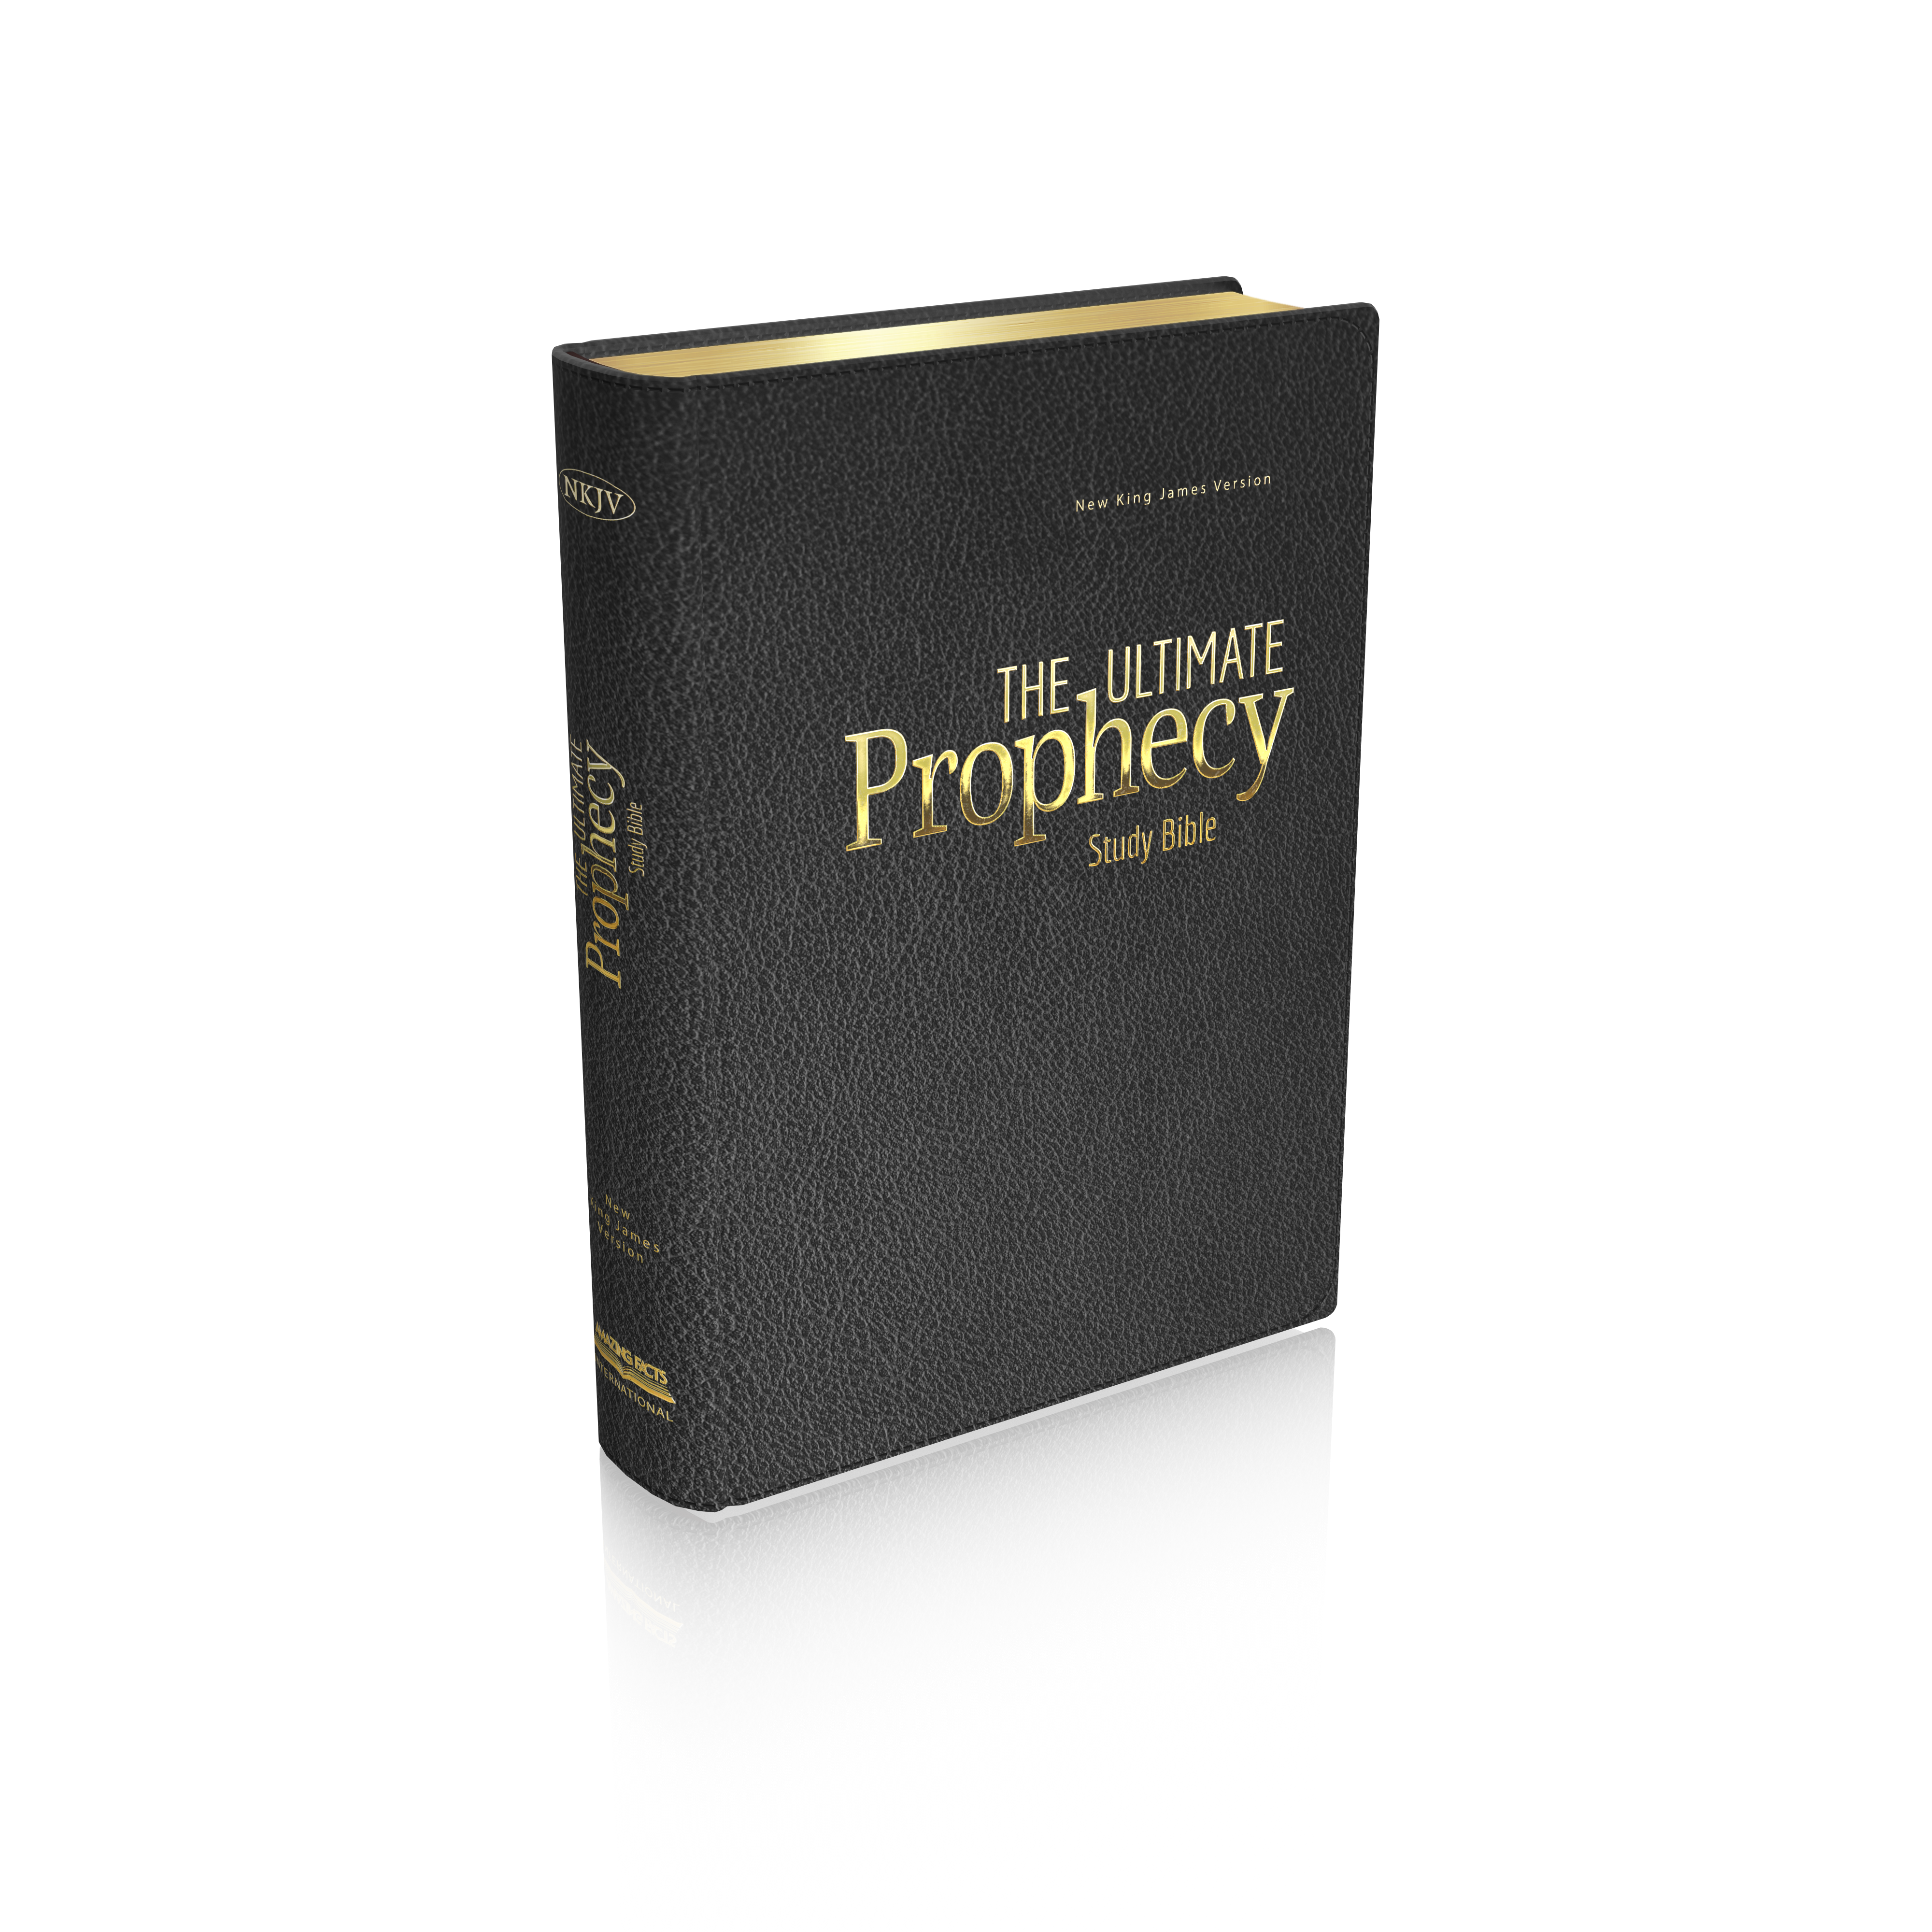 Pre-Order Now! The Ultimate Prophecy Study Bible - Black Leather by Amazing Facts